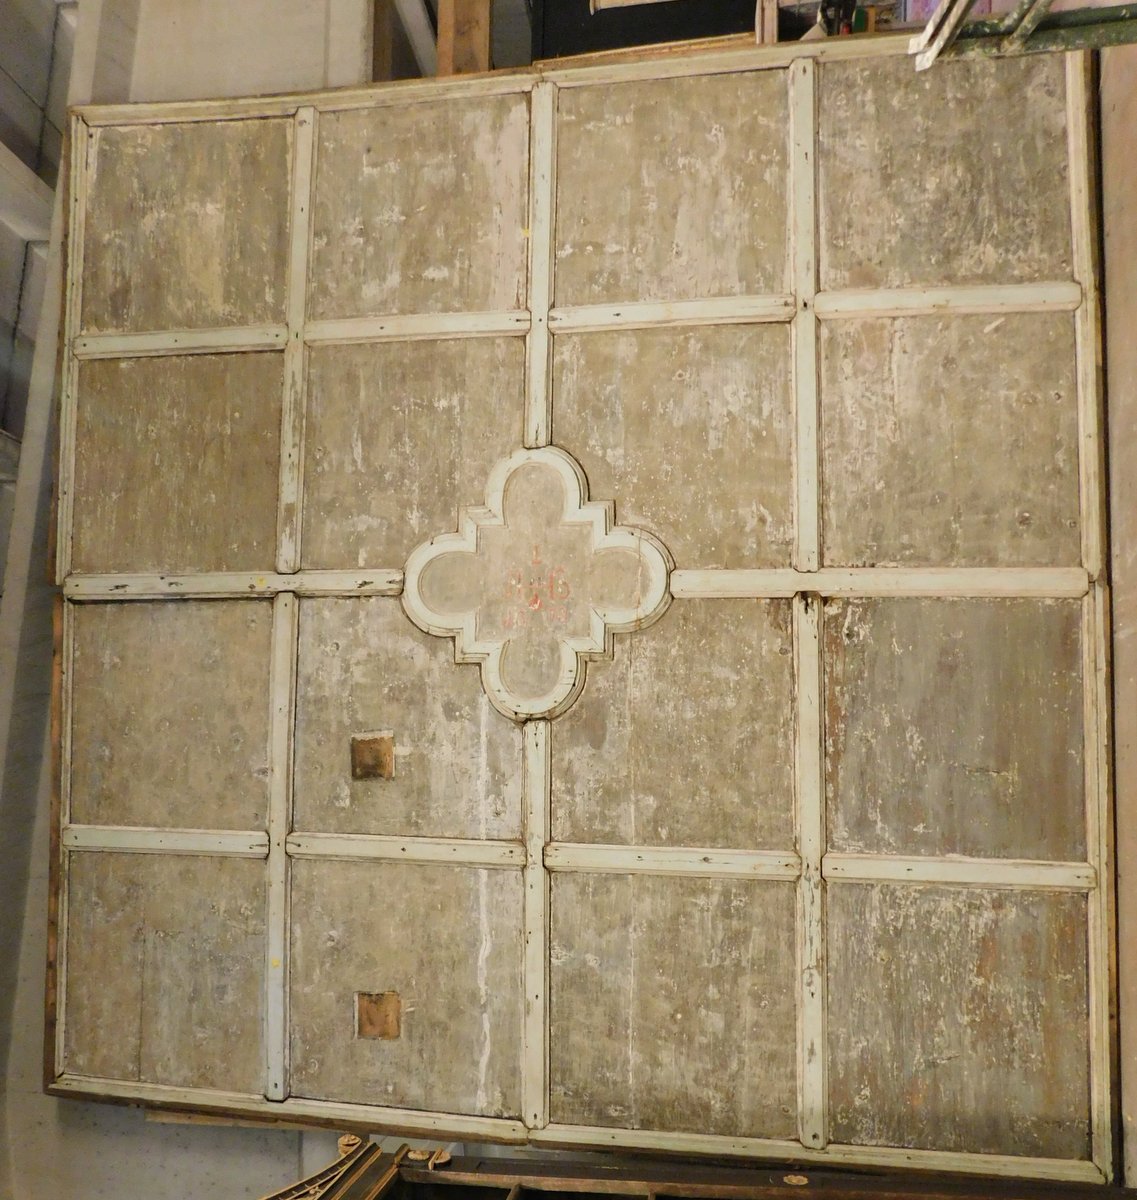 A darb171 - stube ceiling dated 1873, from Switzerland, meas. cm l 440 x h 455